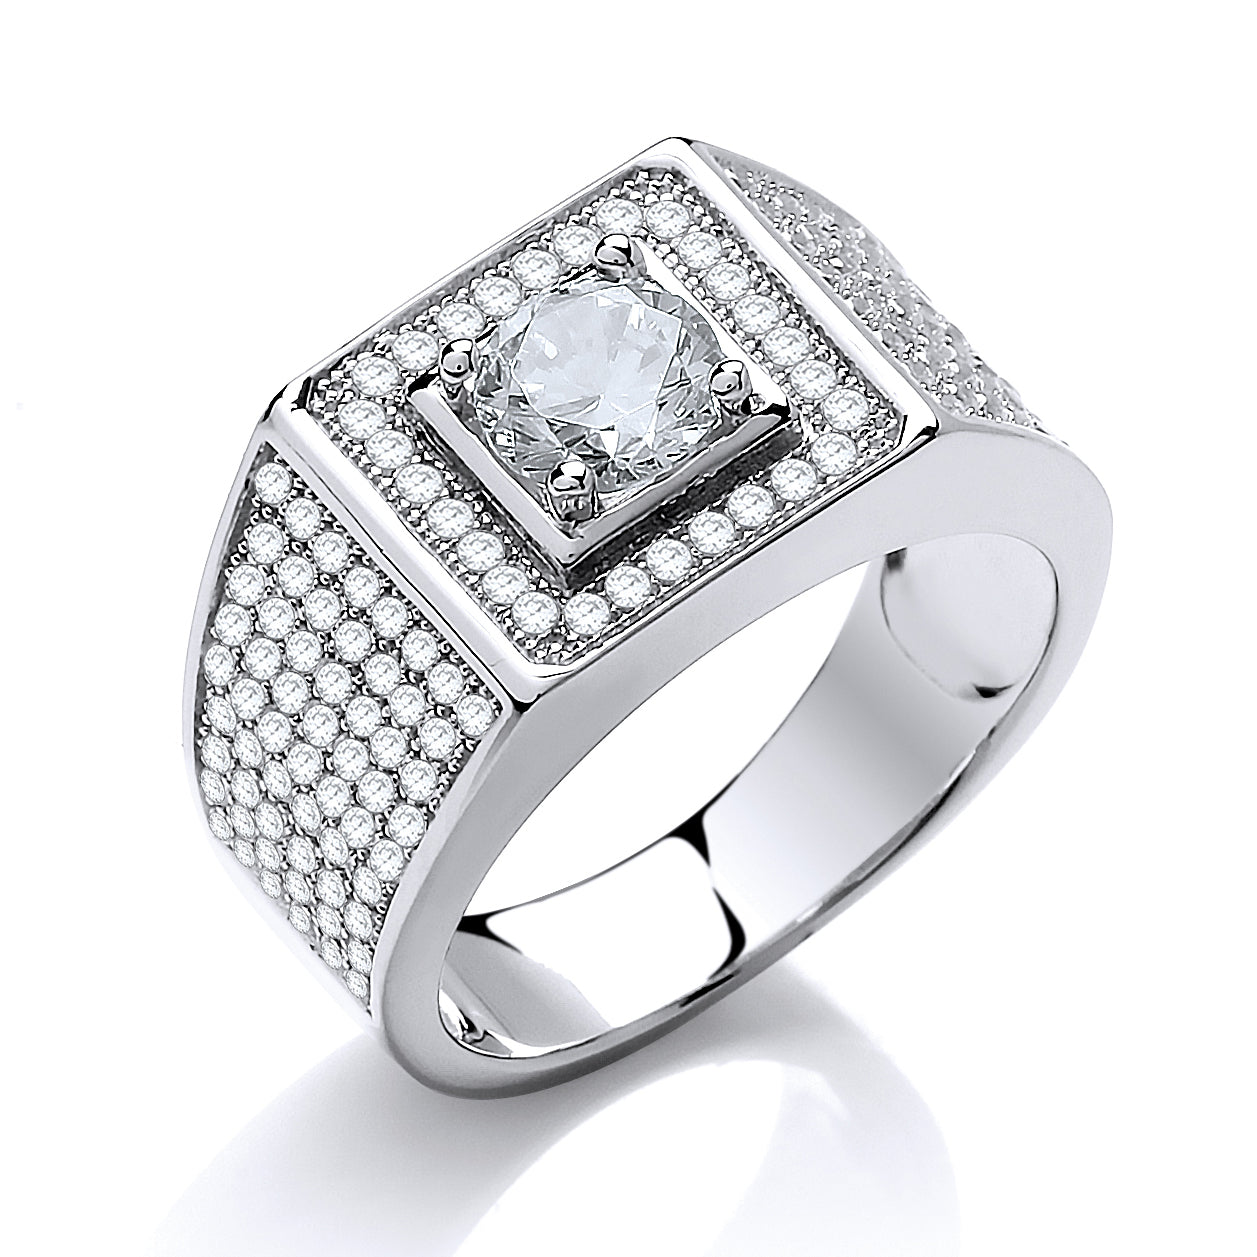 Silver  CZ Pave Encrusted Solitaire Signet Ring - SZR013